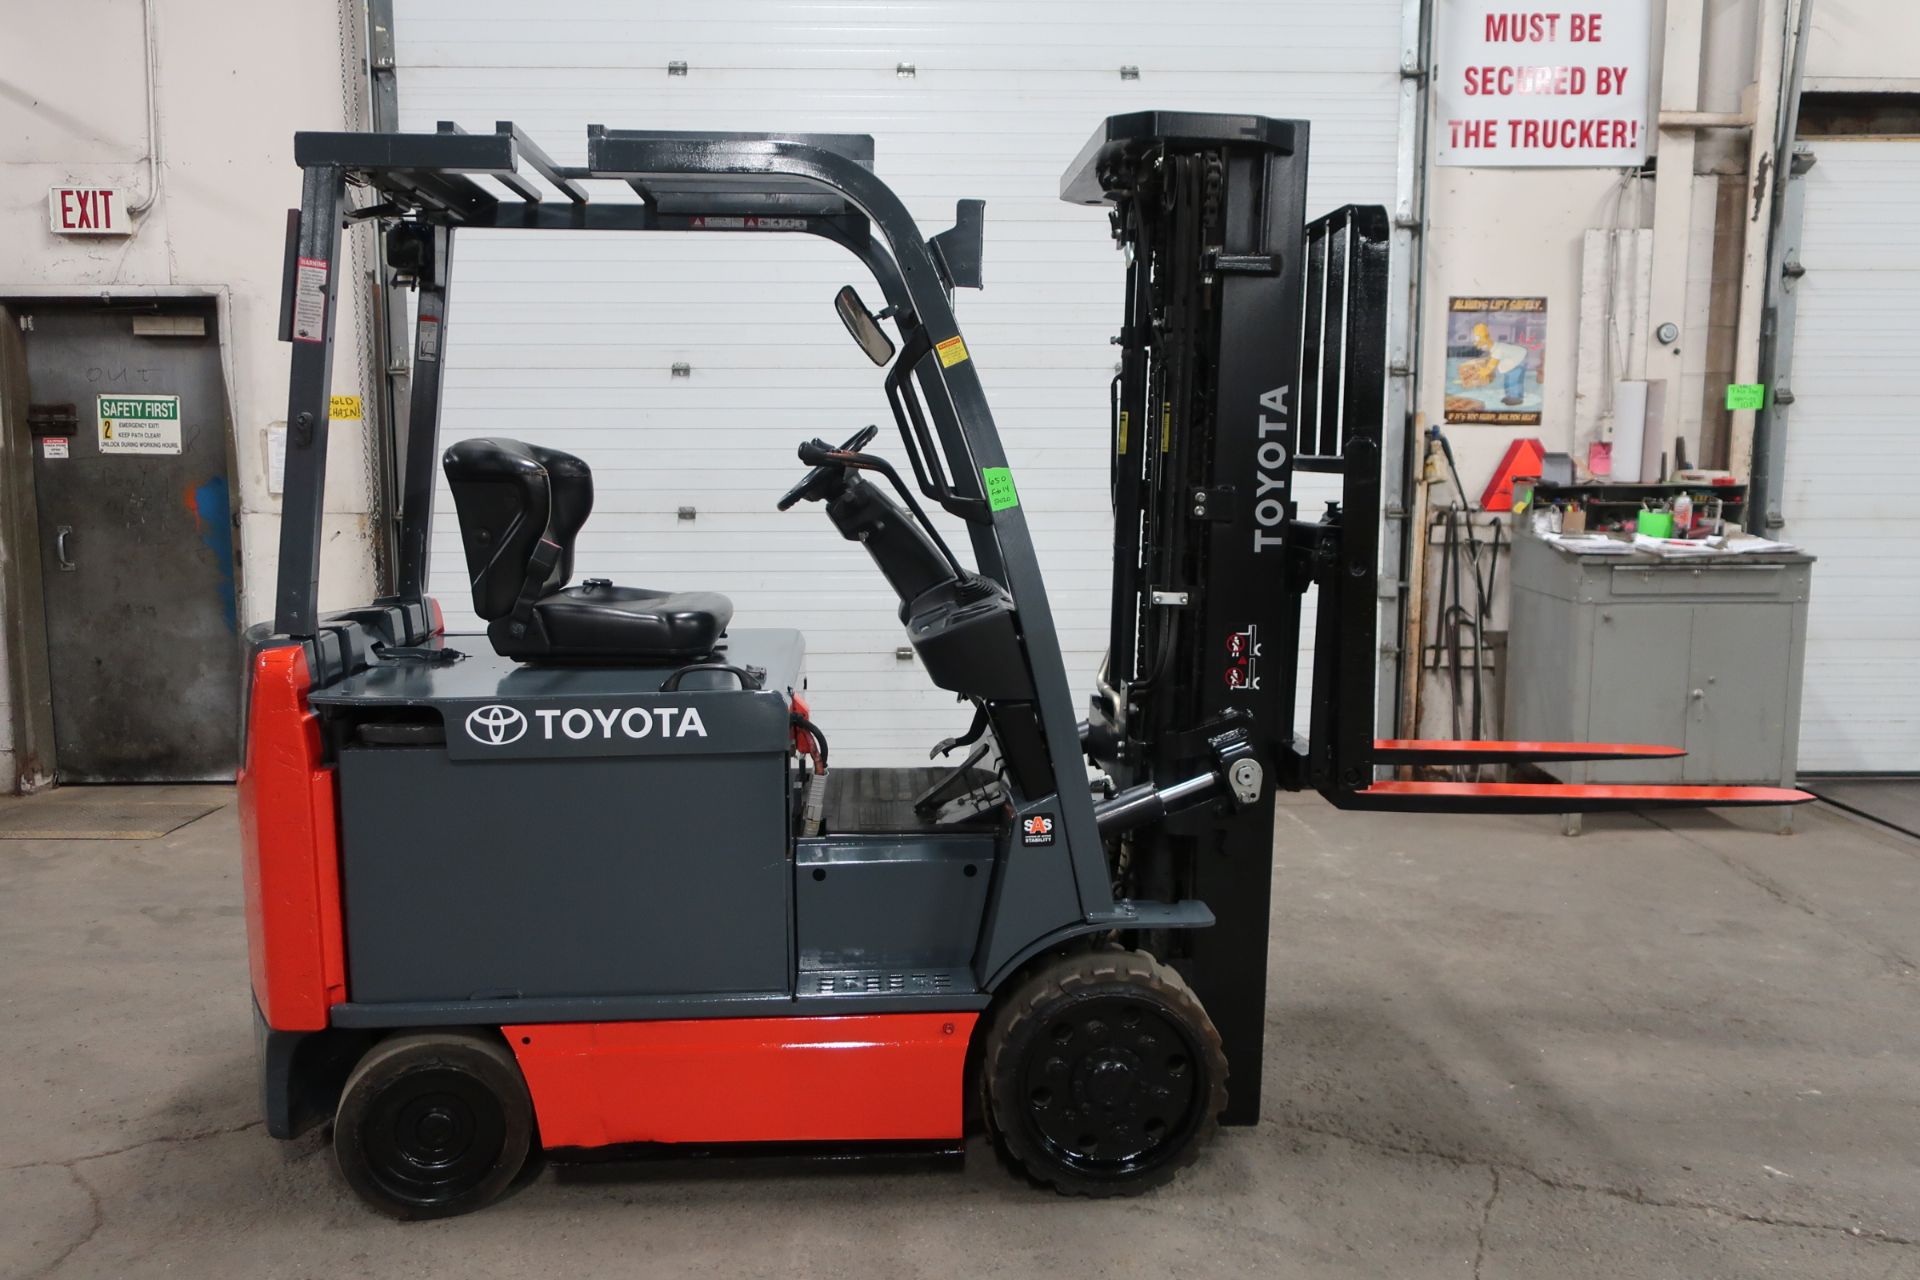 FREE CUSTOMS - 2014 Toyota 6000lbs Electric Forklift with sideshift and 3-stage mast